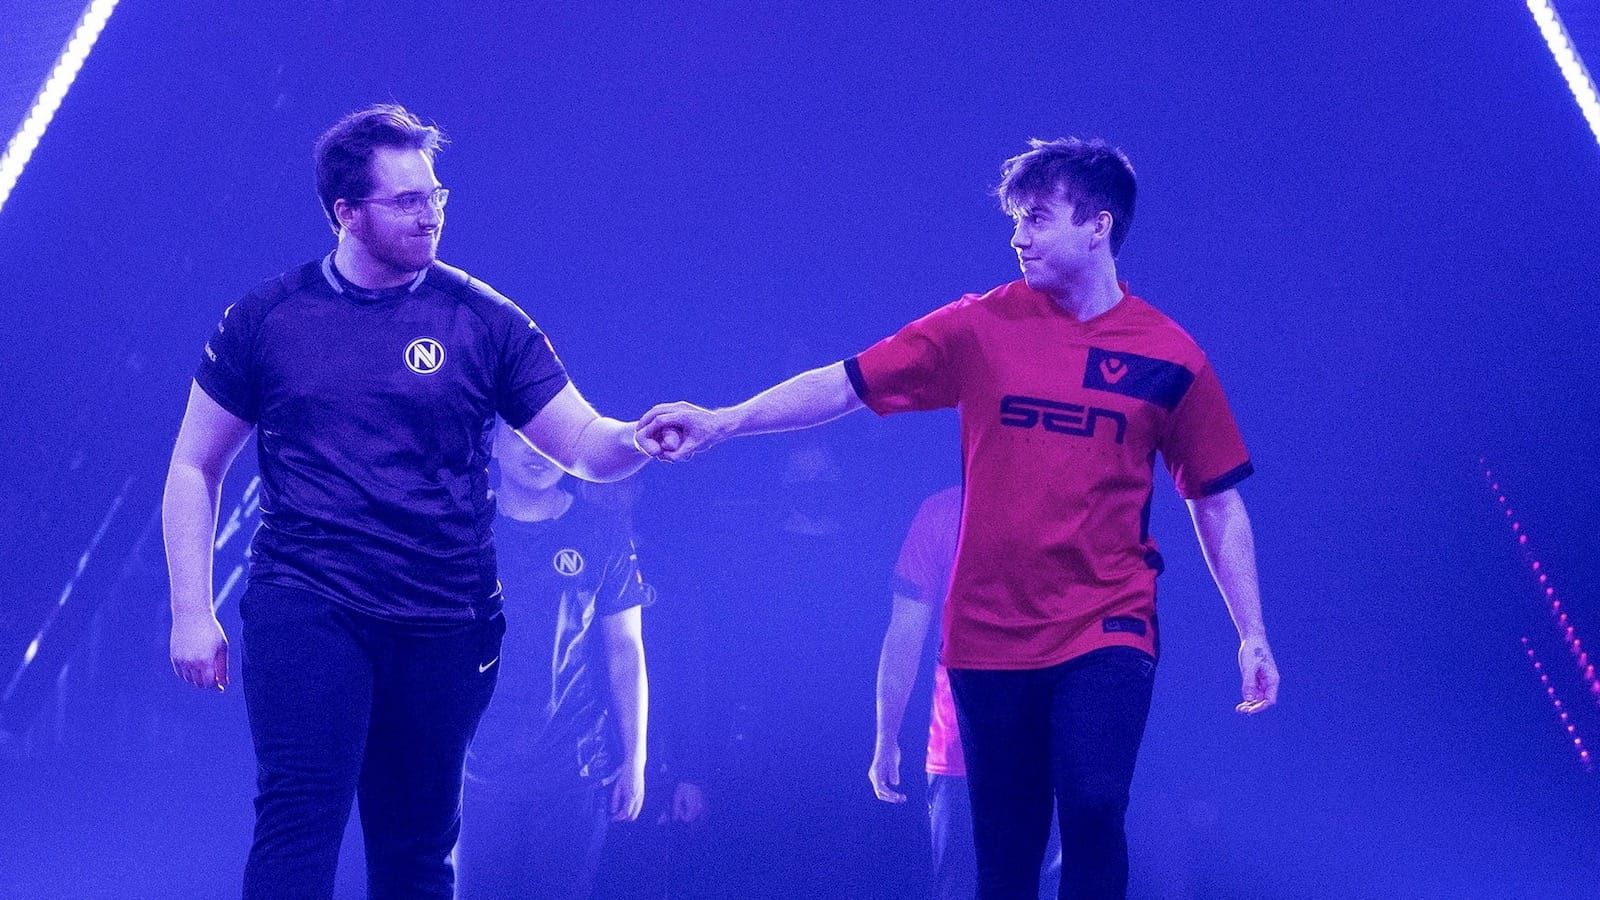 Envy player yay (left) and Sentinels player dapr (right) bump fists as they walk out on stage